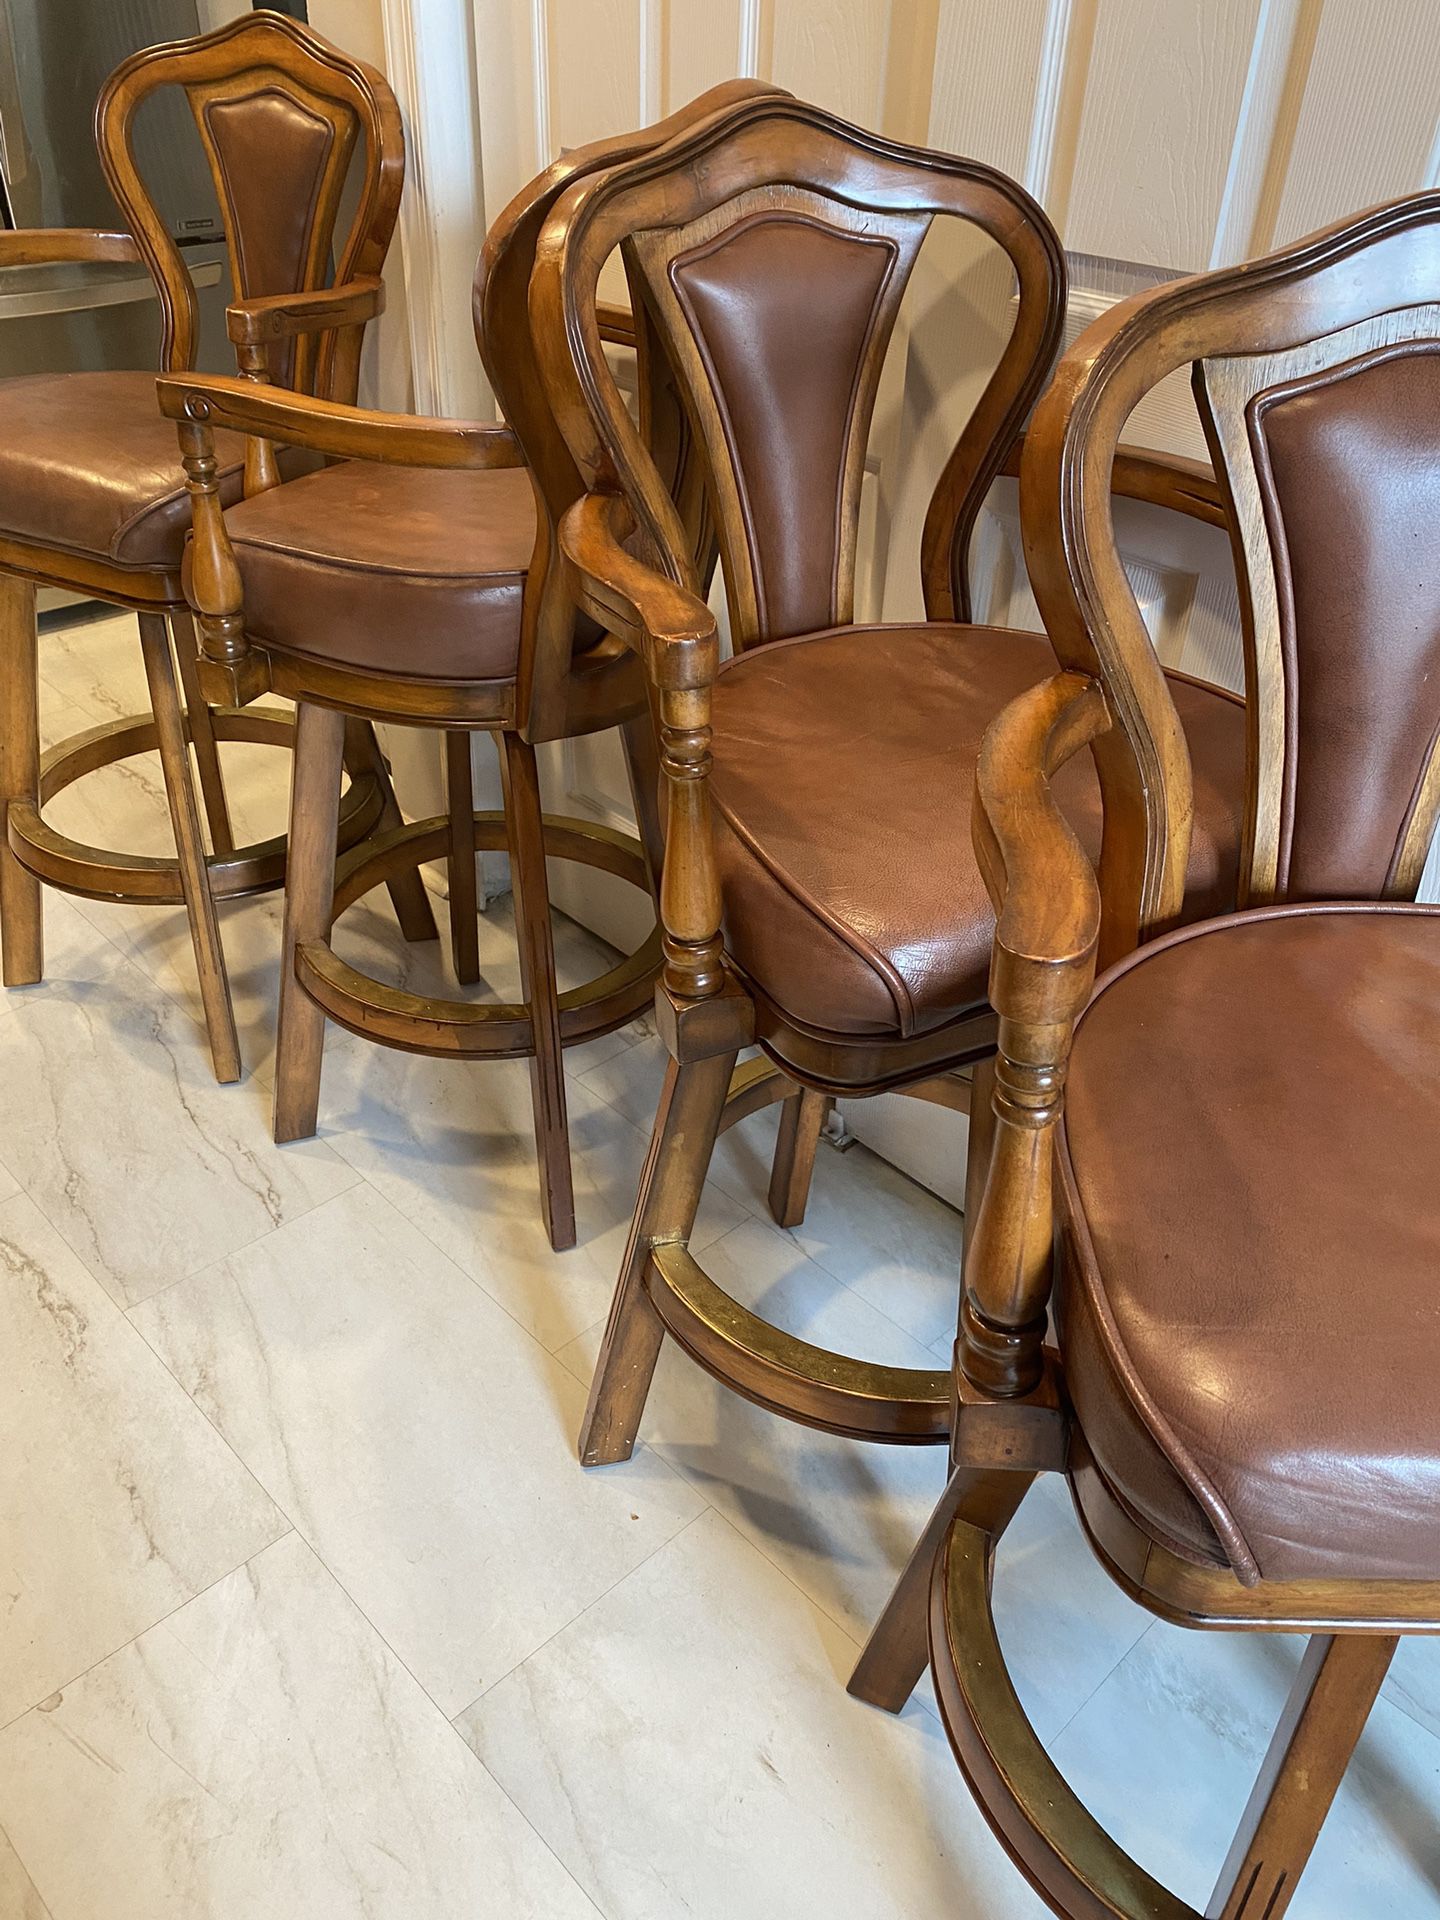 Bar Stools, Swival Bar Height With  Real Leather